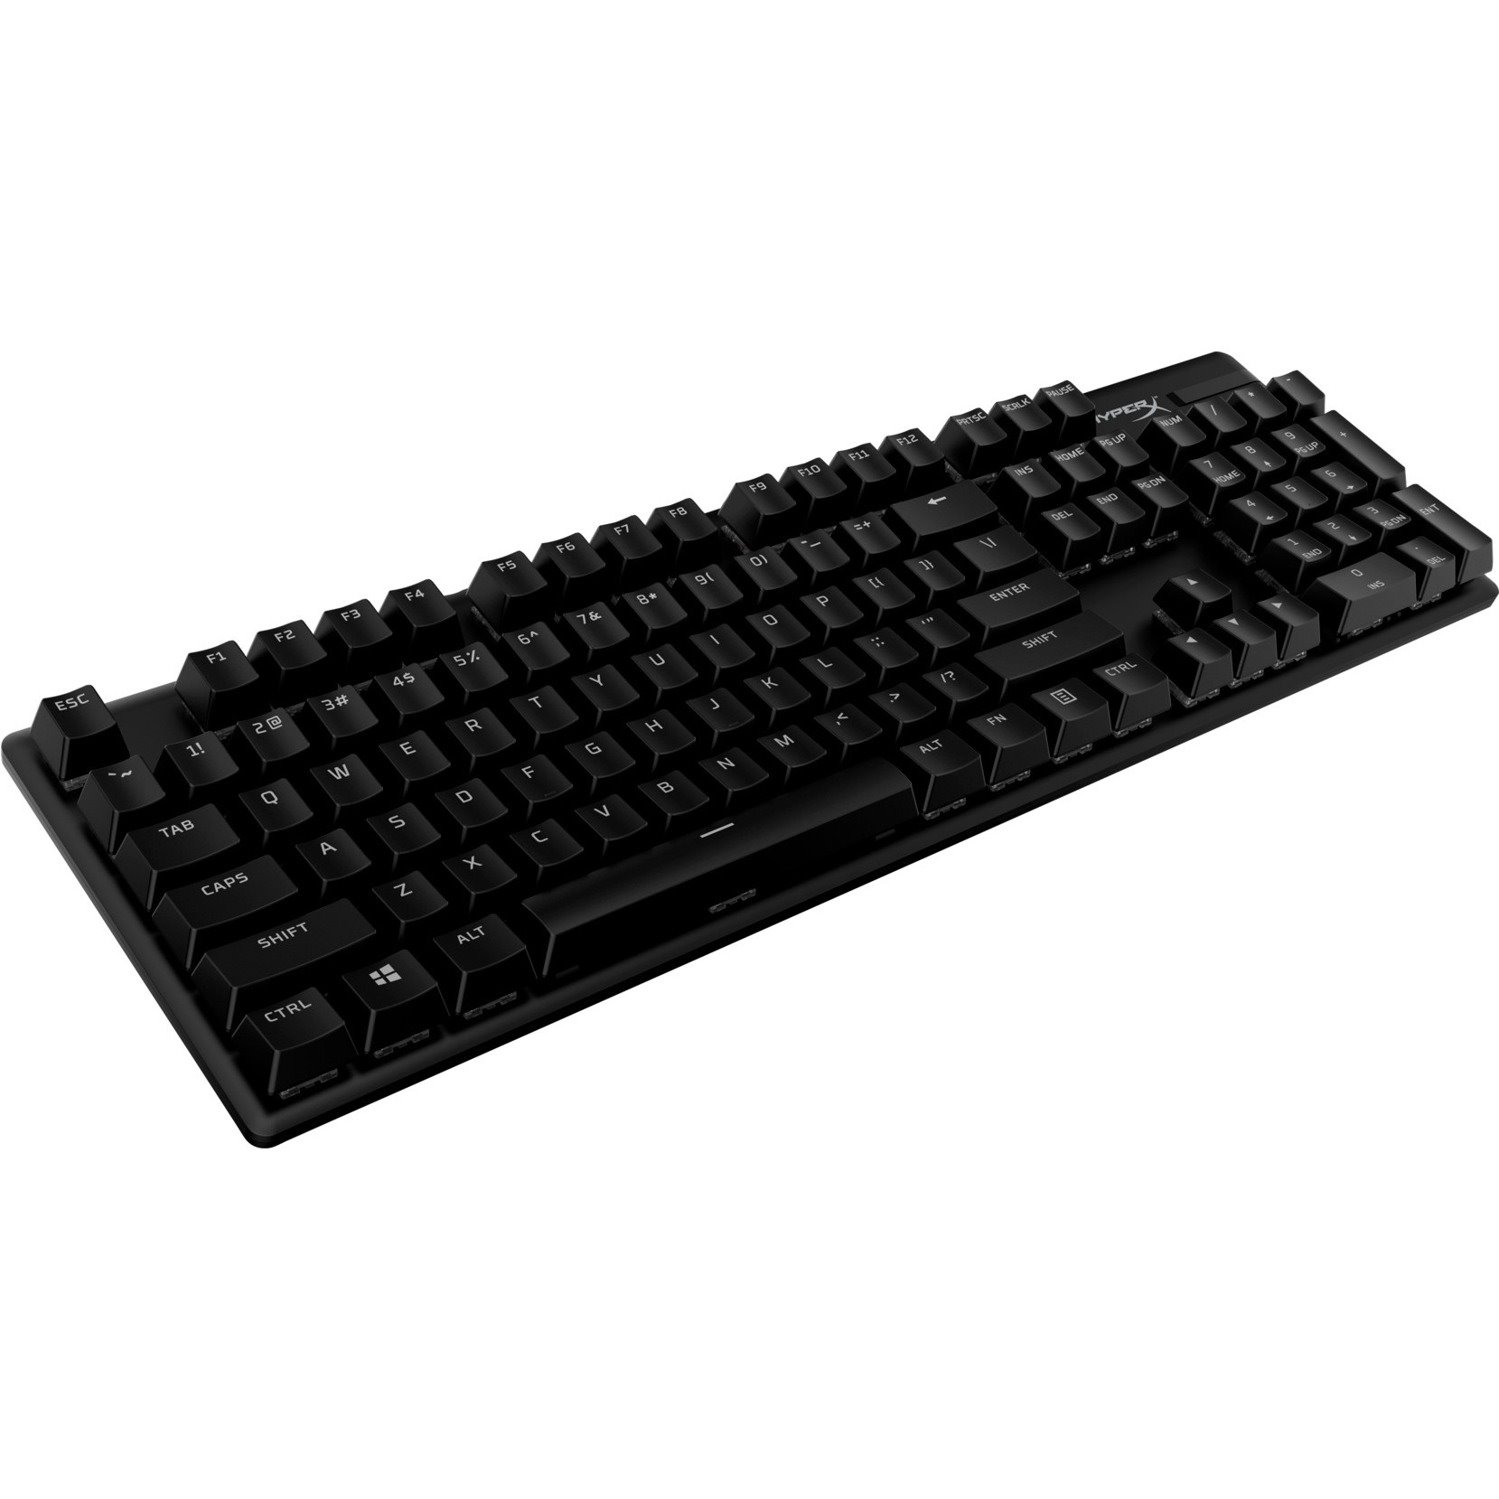 HyperX Gaming Keyboard - Cable Connectivity - LED - English (US) - Black